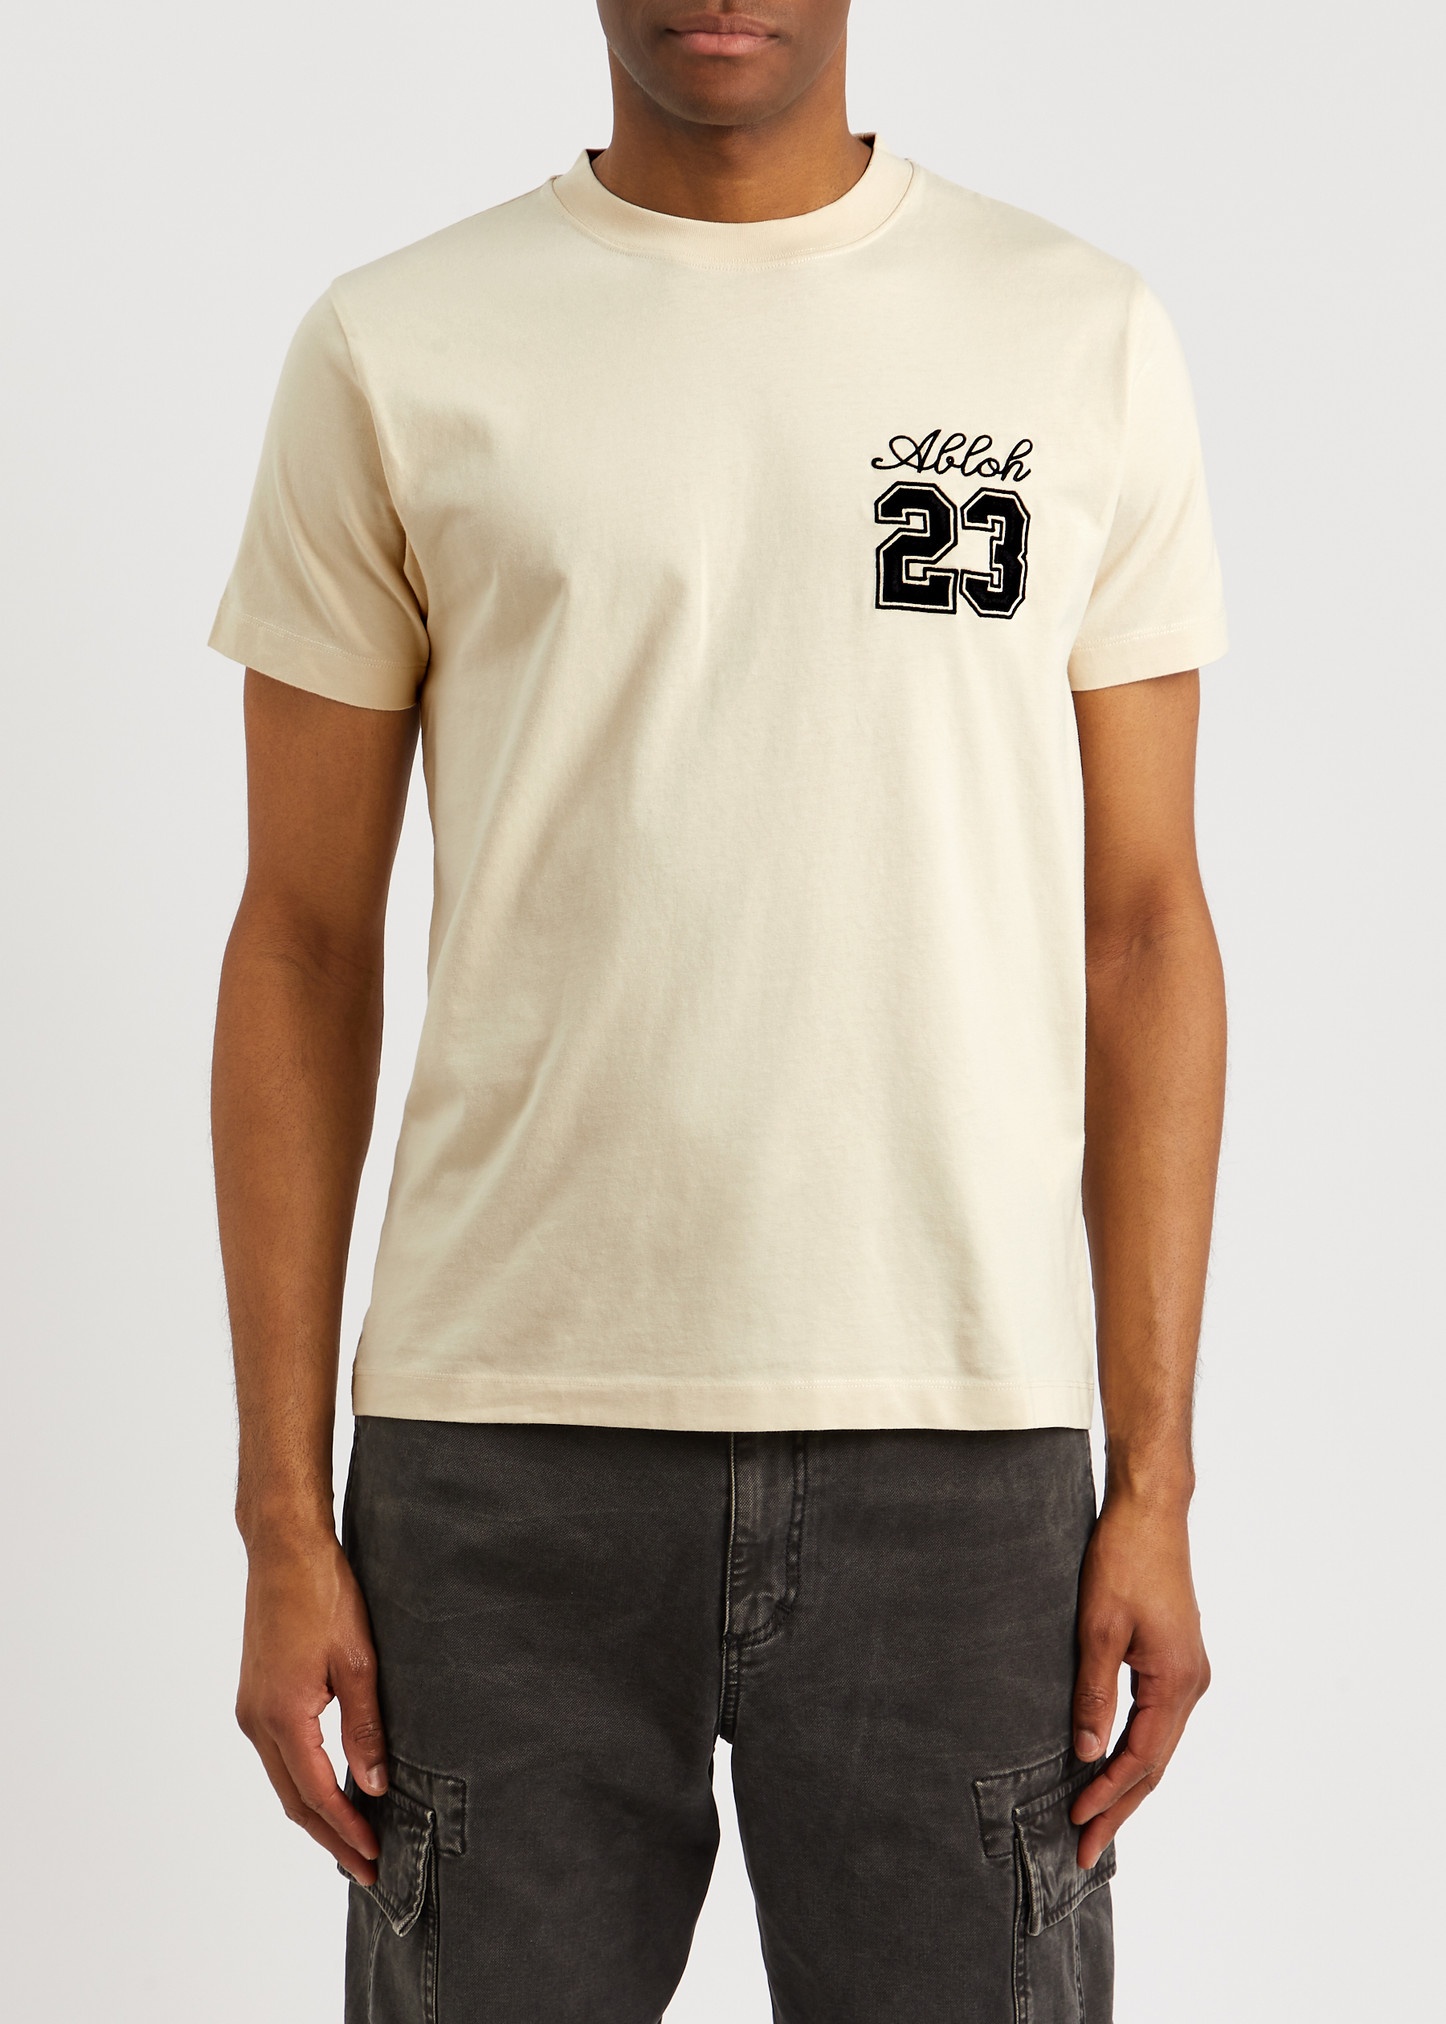 23 logo-embroidered cotton T-shirt - 2